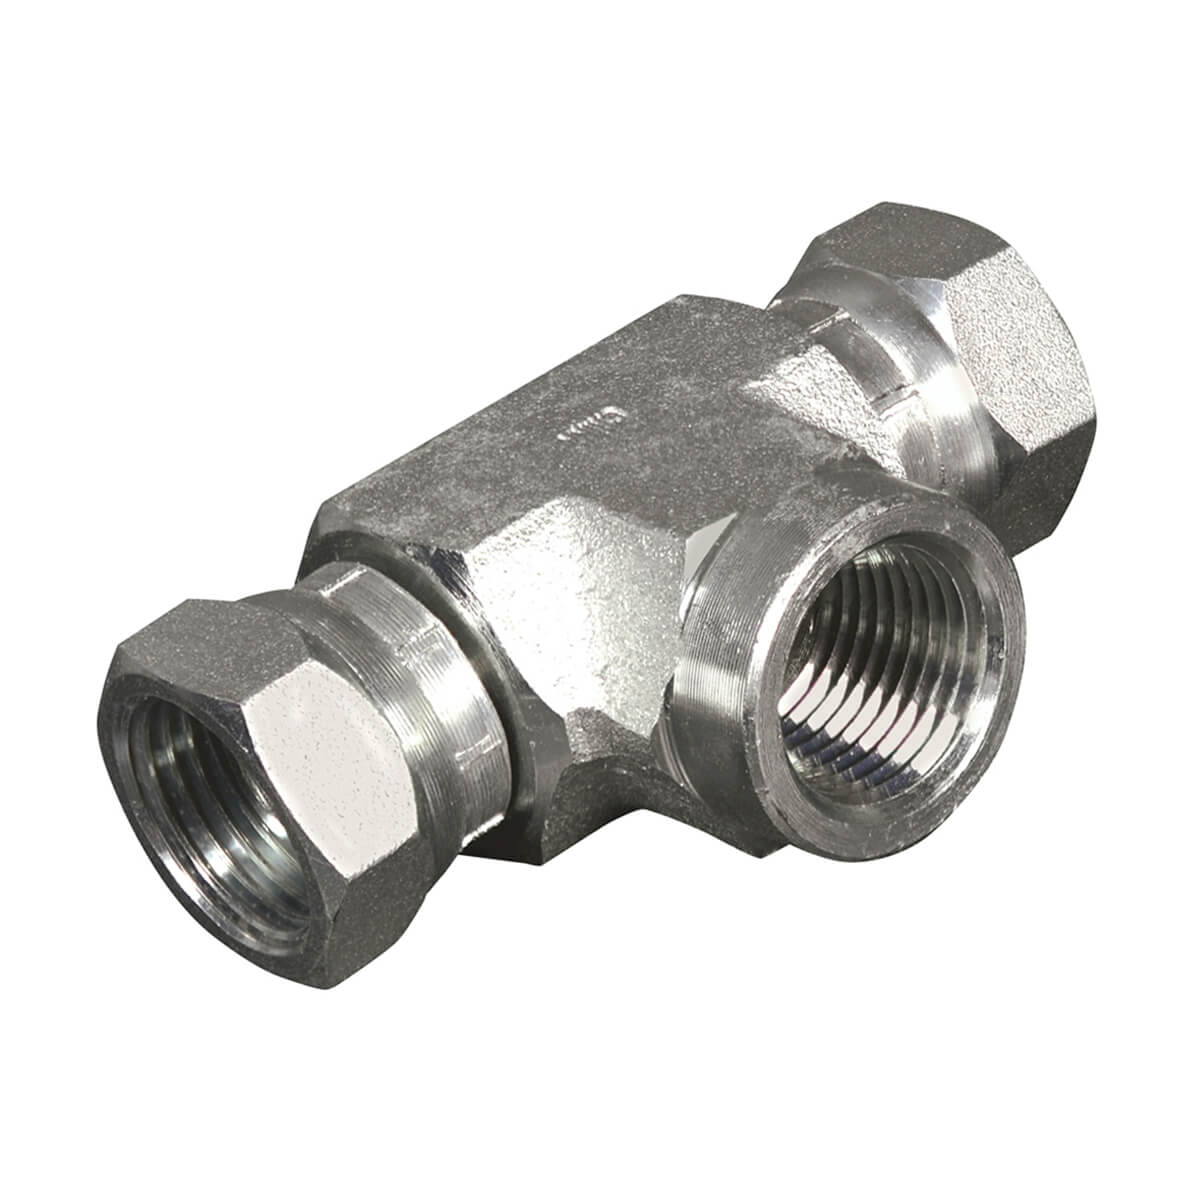 Swivel Hydraulic Tee Adapter - 1/2-in FPT x 1/2-in FPT